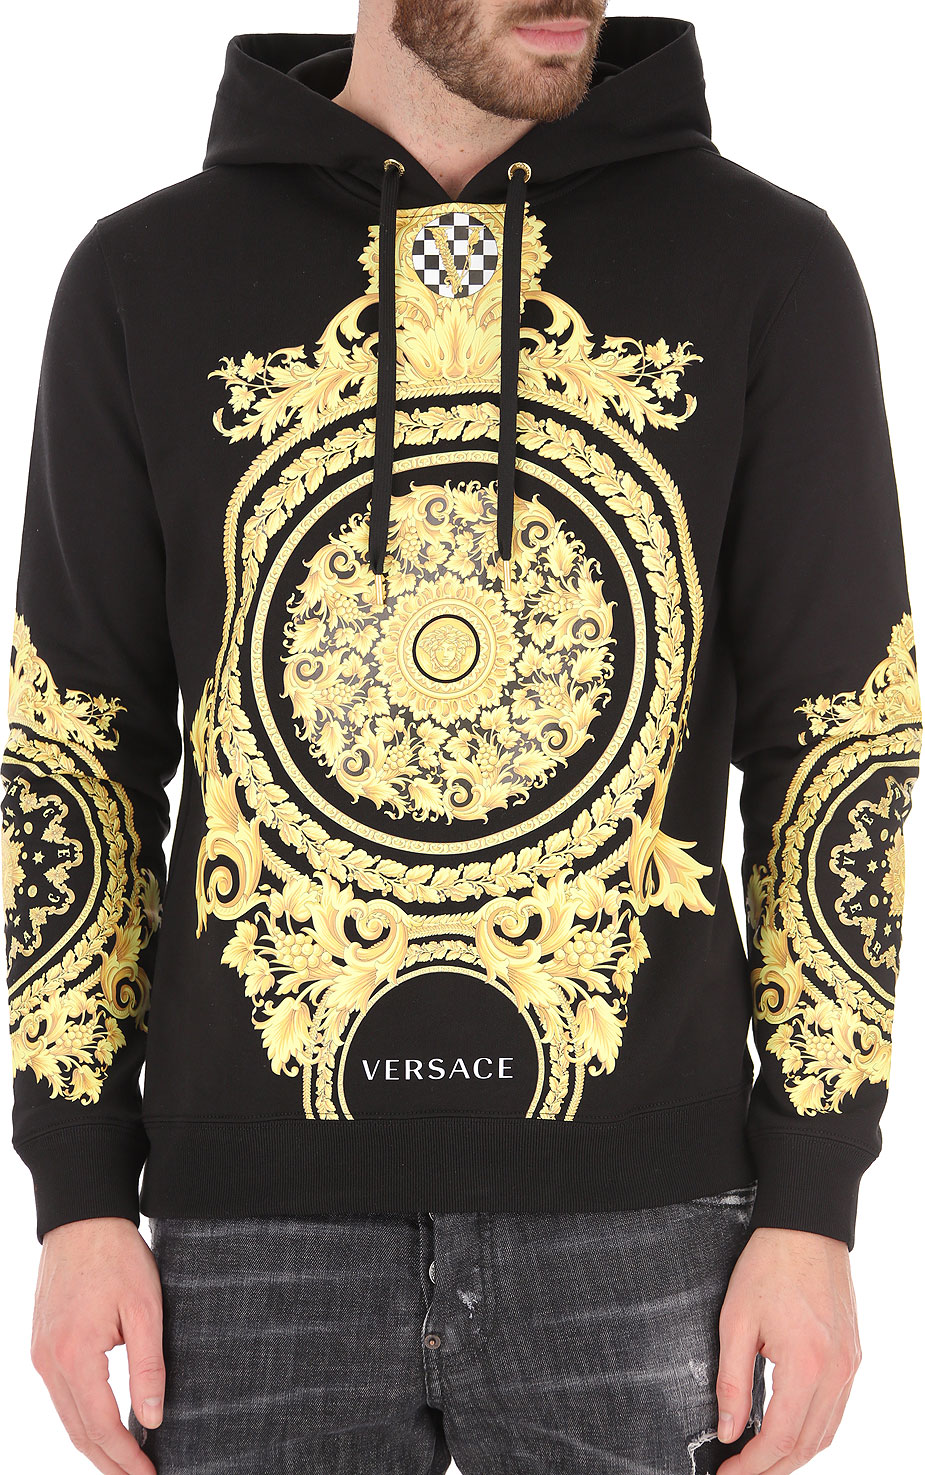 Mens Clothing Versace, Style code: a85346-a231242-a2003